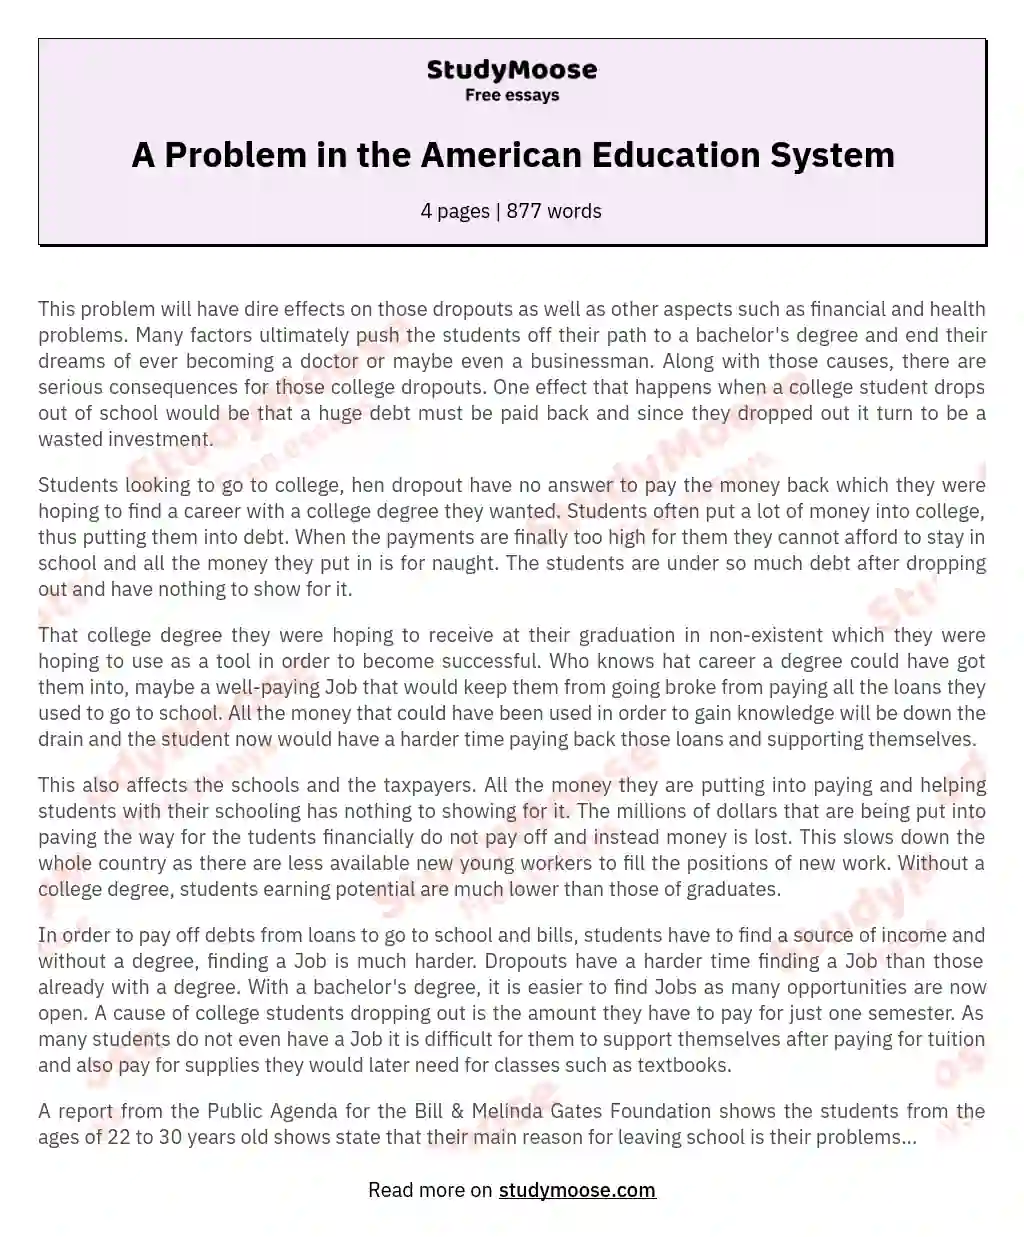 A Problem in the American Education System essay